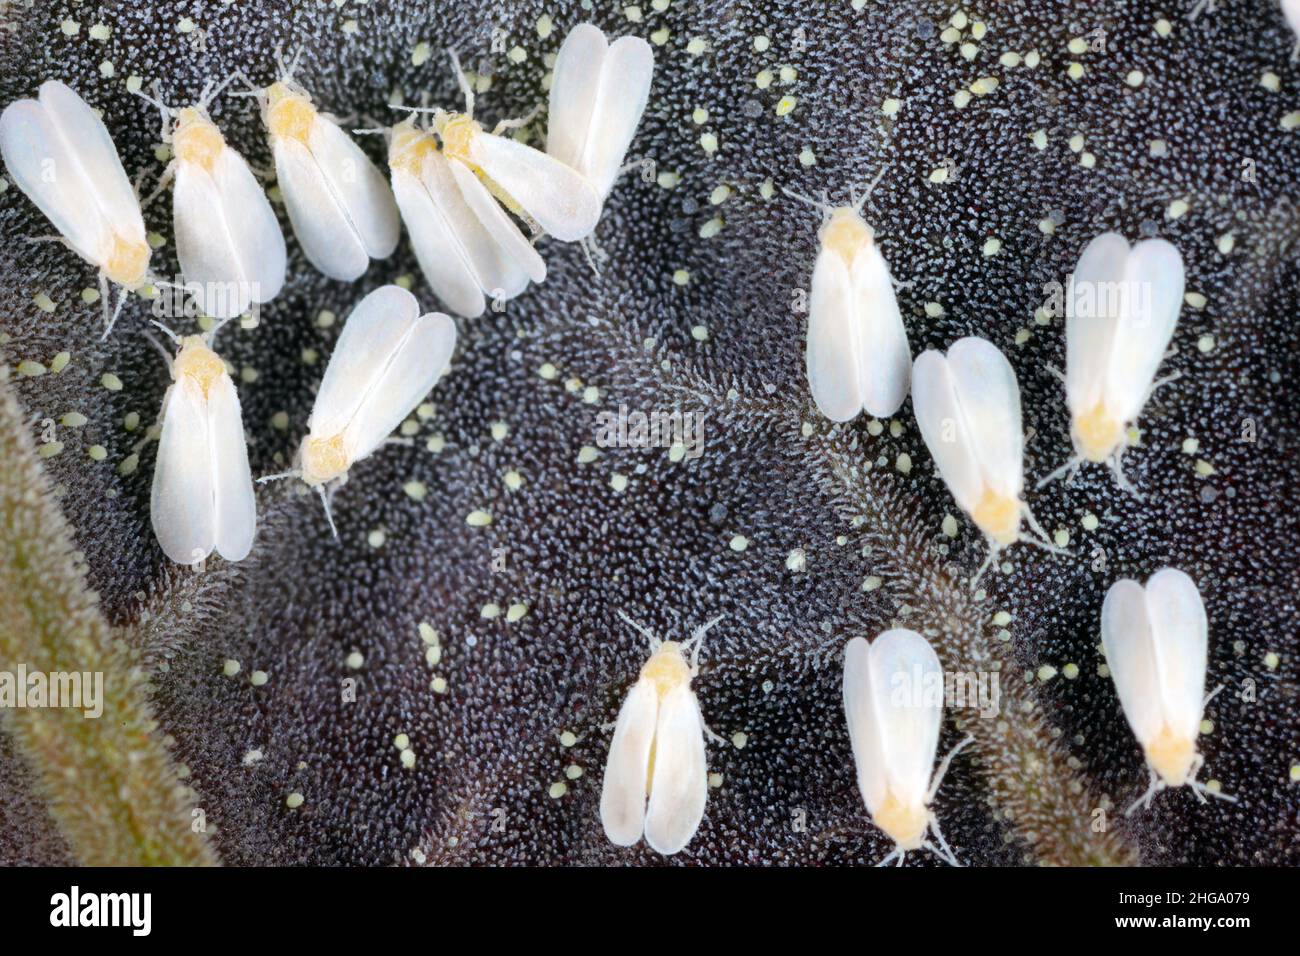 Greenhouse whitefly - Trialeurodes vaporariorum on the underside of leaves. It is a currently important agricultural pest. Stock Photo